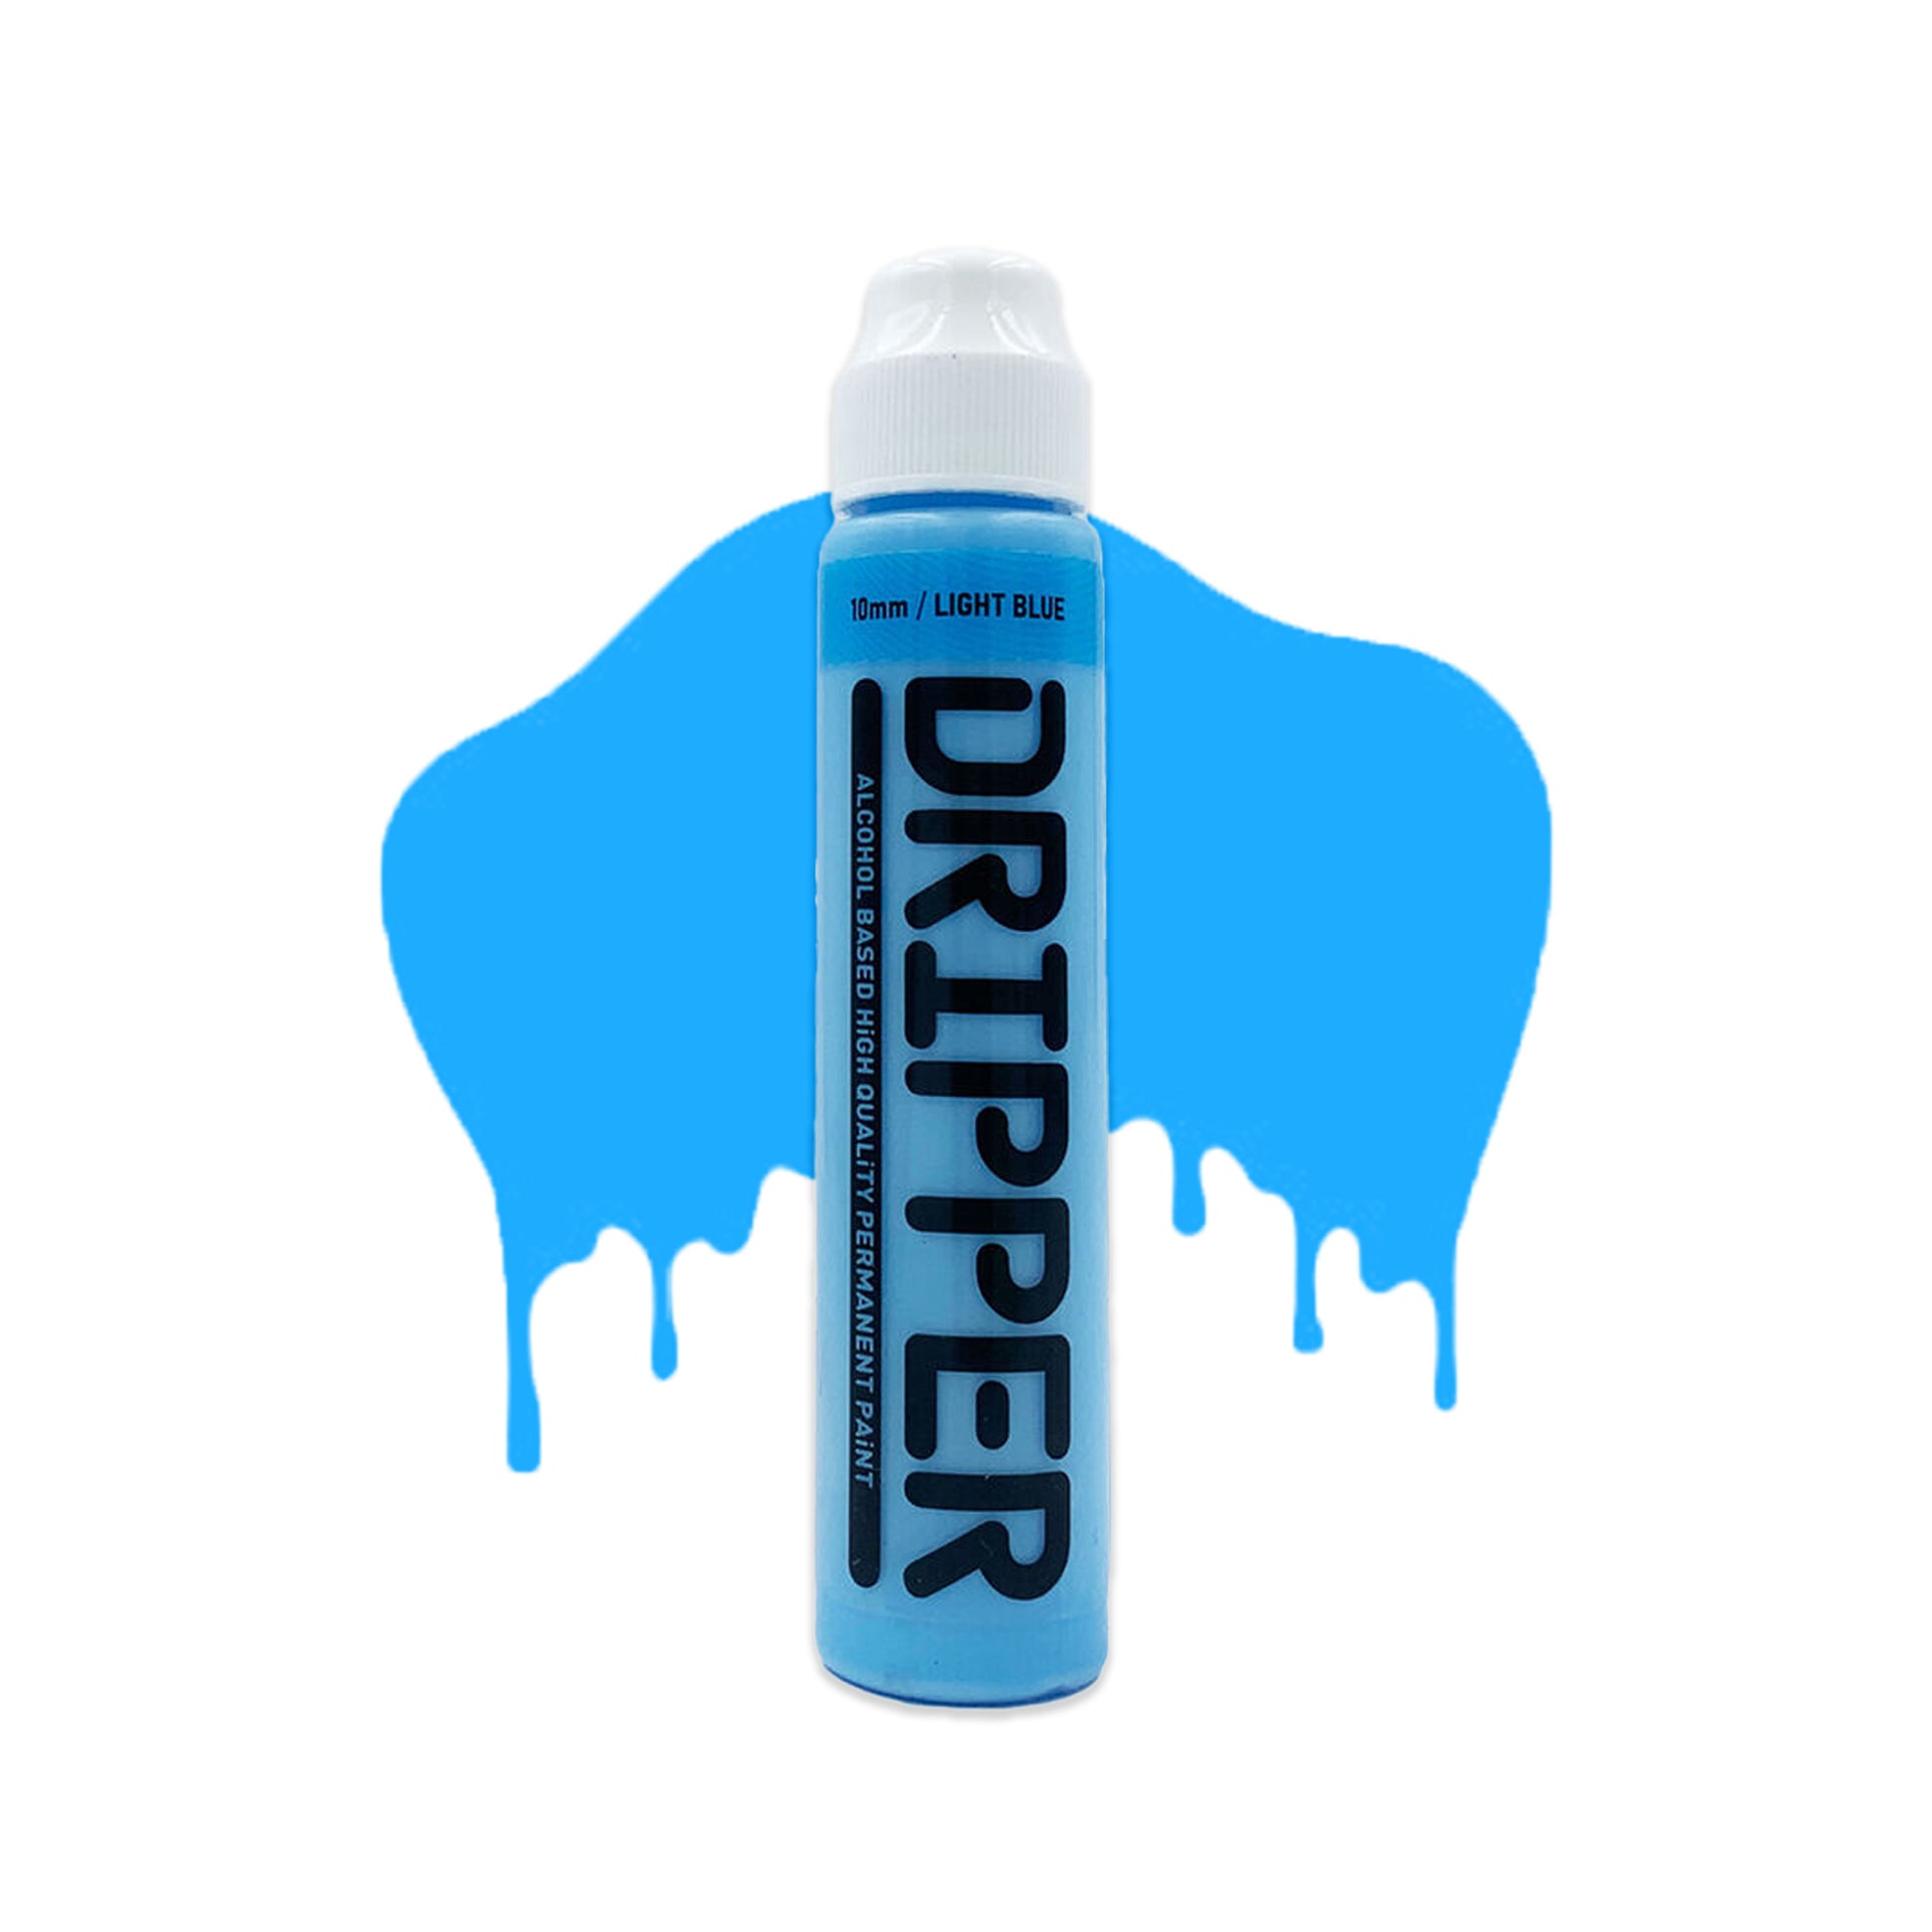 Light Blue mop container with white cap and the word "Dripper" written on the face in a bold black font. The mop is positioned in front of a white background with drips that match the light blue color of the mop.